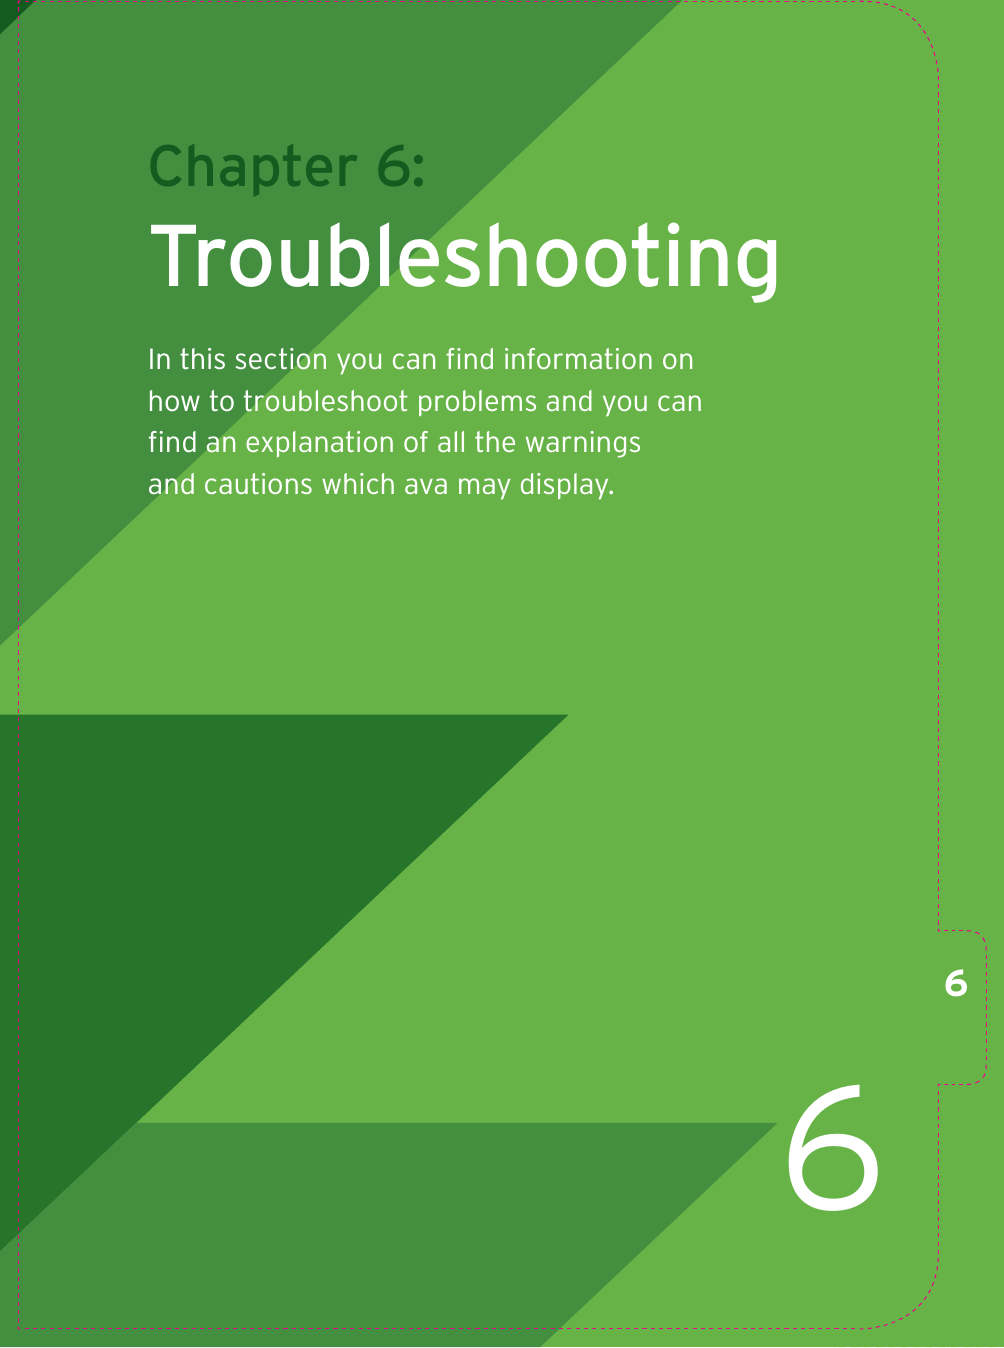 6Chapter 6: Troubleshooting In this section you can ﬁ nd information on how to troubleshoot problems and you can ﬁ nd an explanation of all the warnings and cautions which ava may display.6